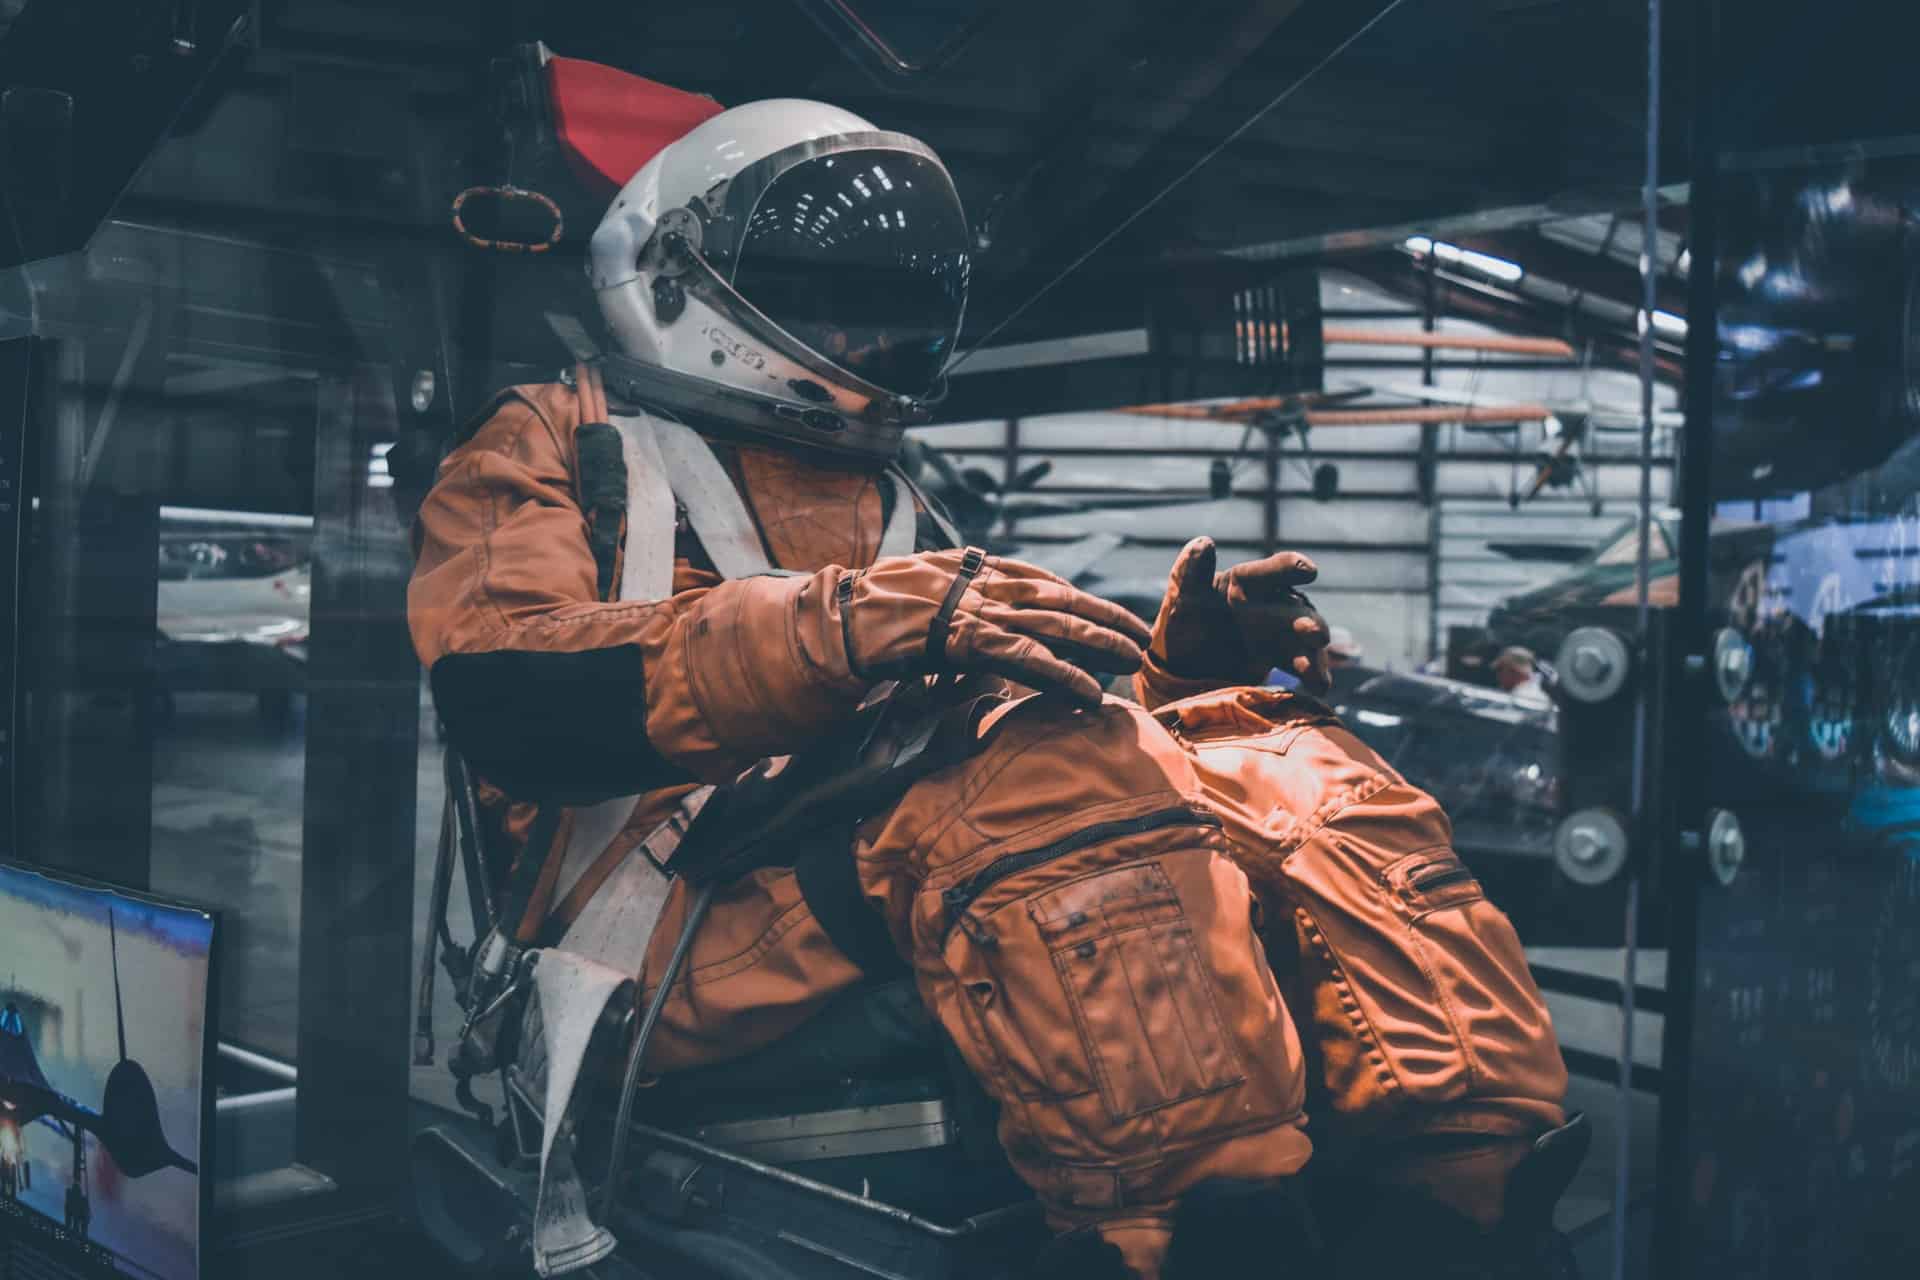 What Would Happen If You Didn’t Wear a Spacesuit on Mars?